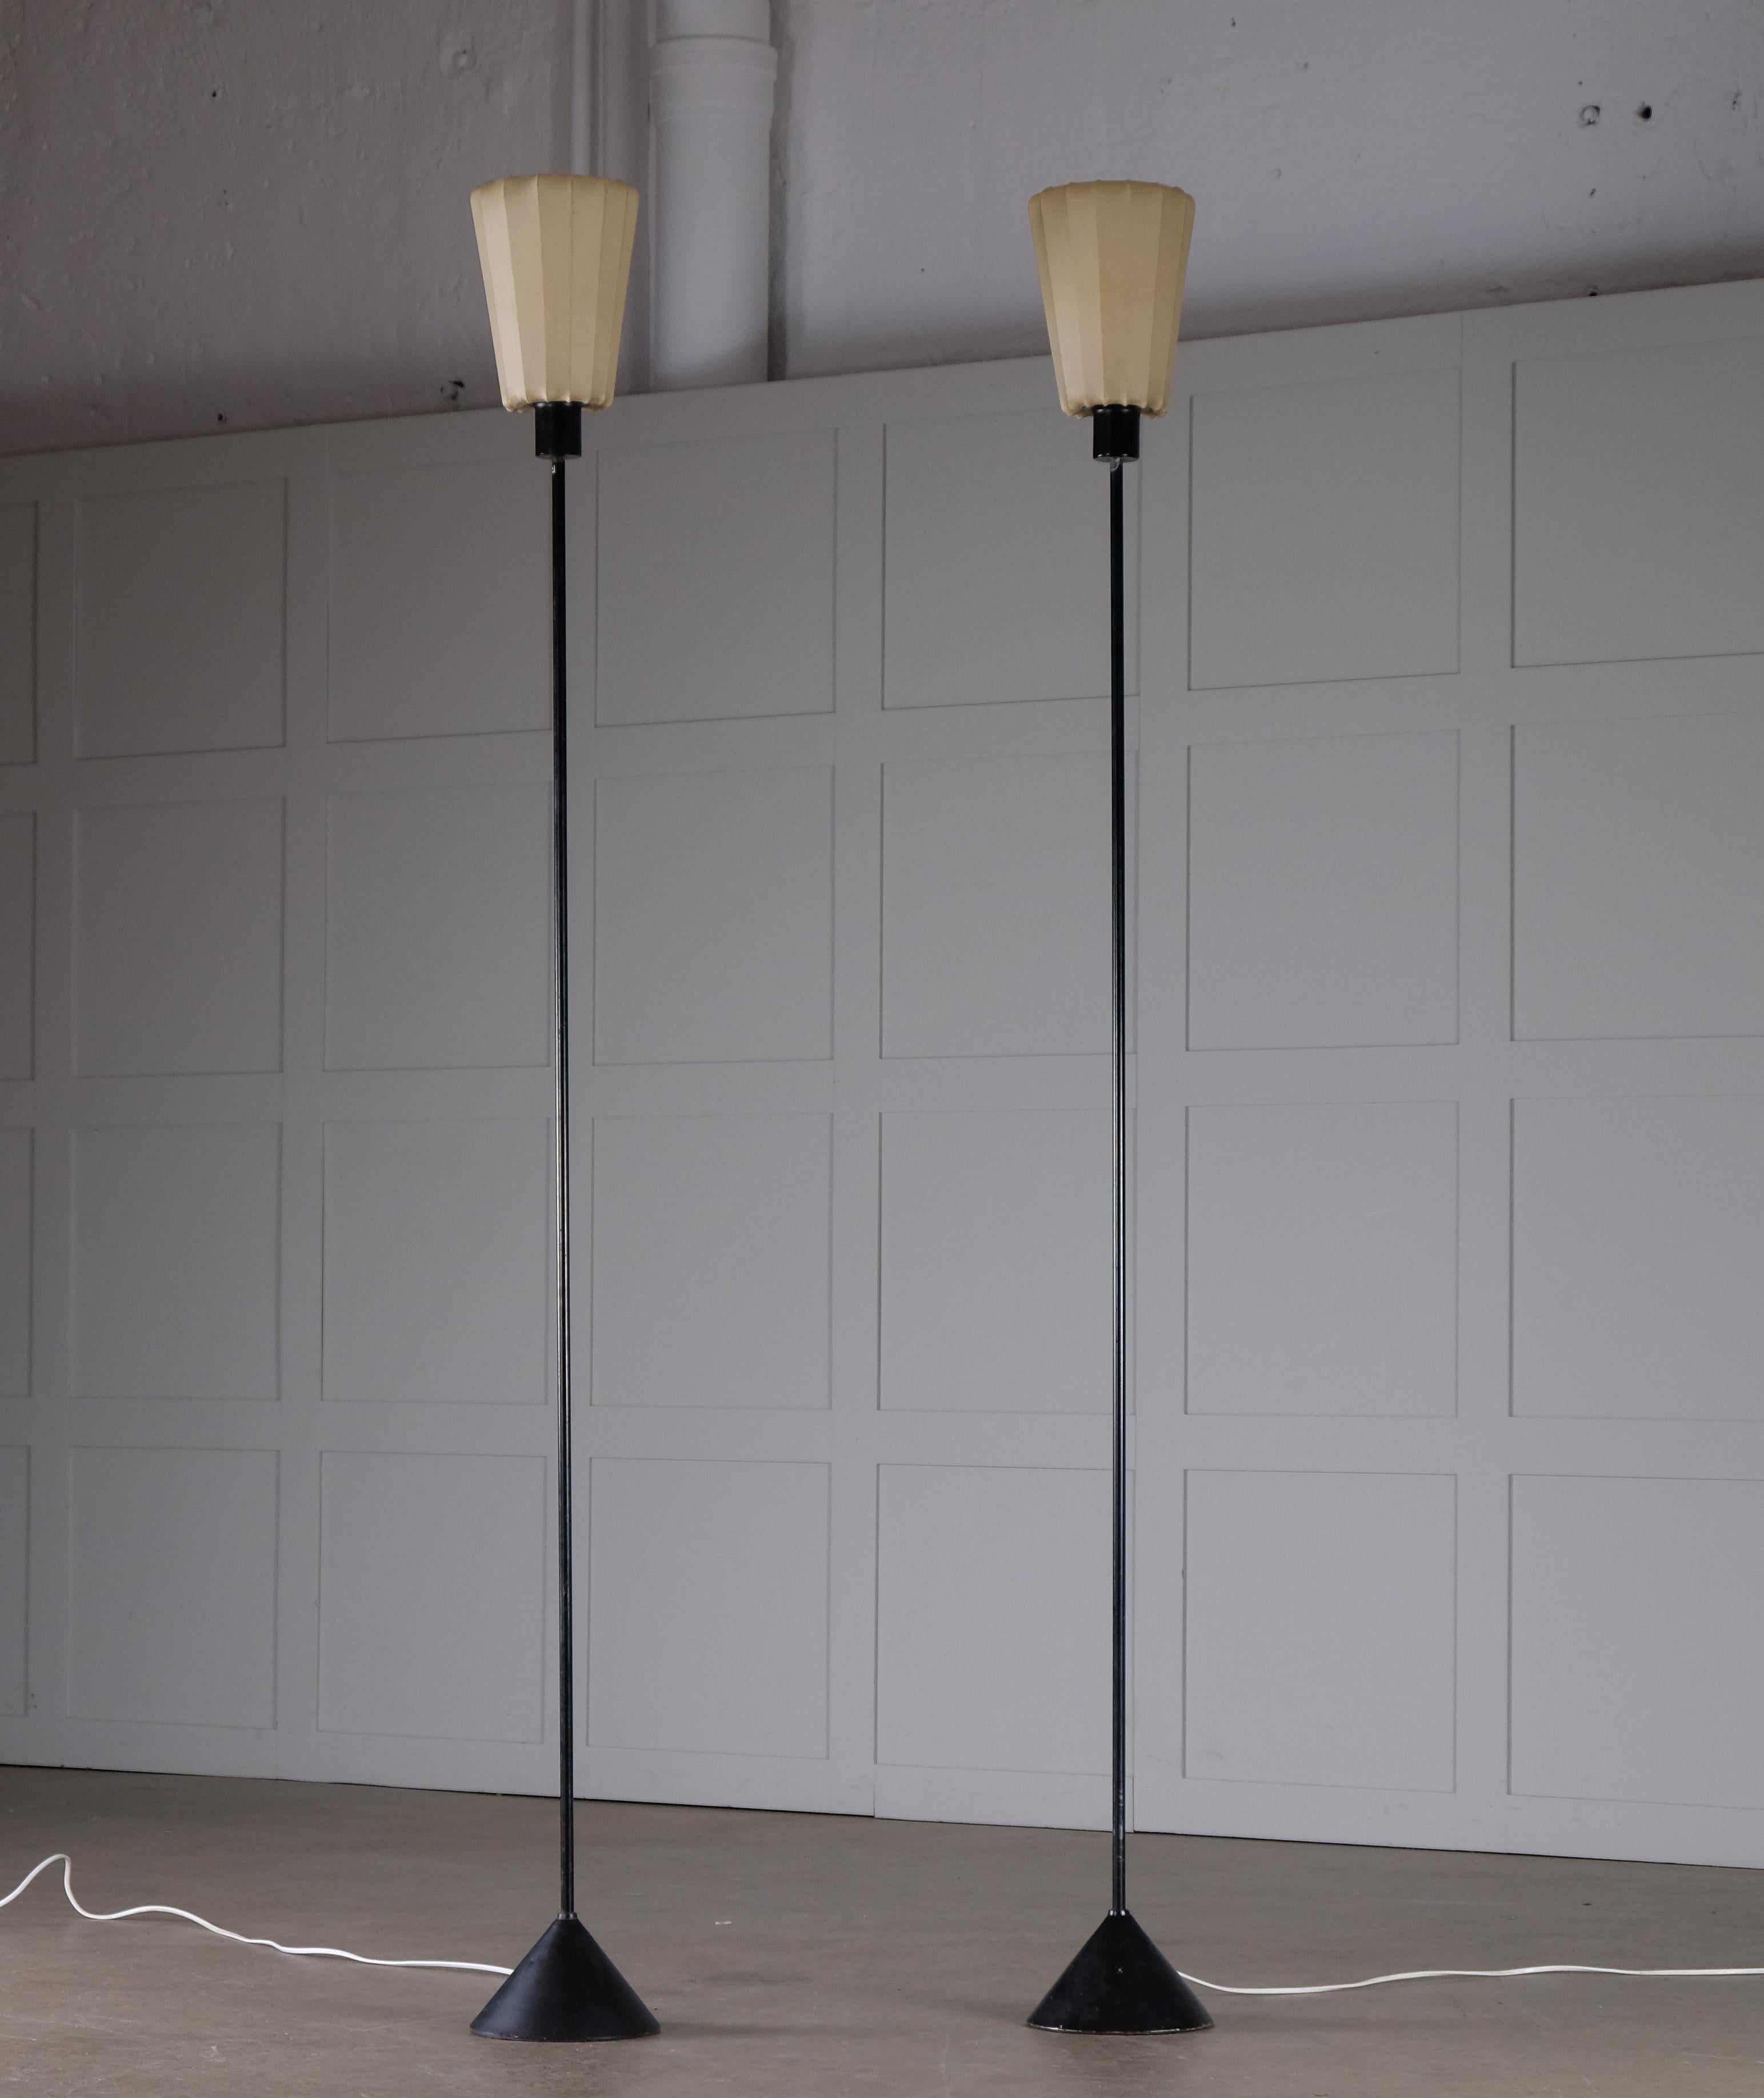 Rare pair of floor lamps model G-23 in black lacquered metal produced by Hans-Agne Jakobsson, Markaryd, Sweden, 1950s. 
Very good condition. 
Diameter of the base: 18 cm
